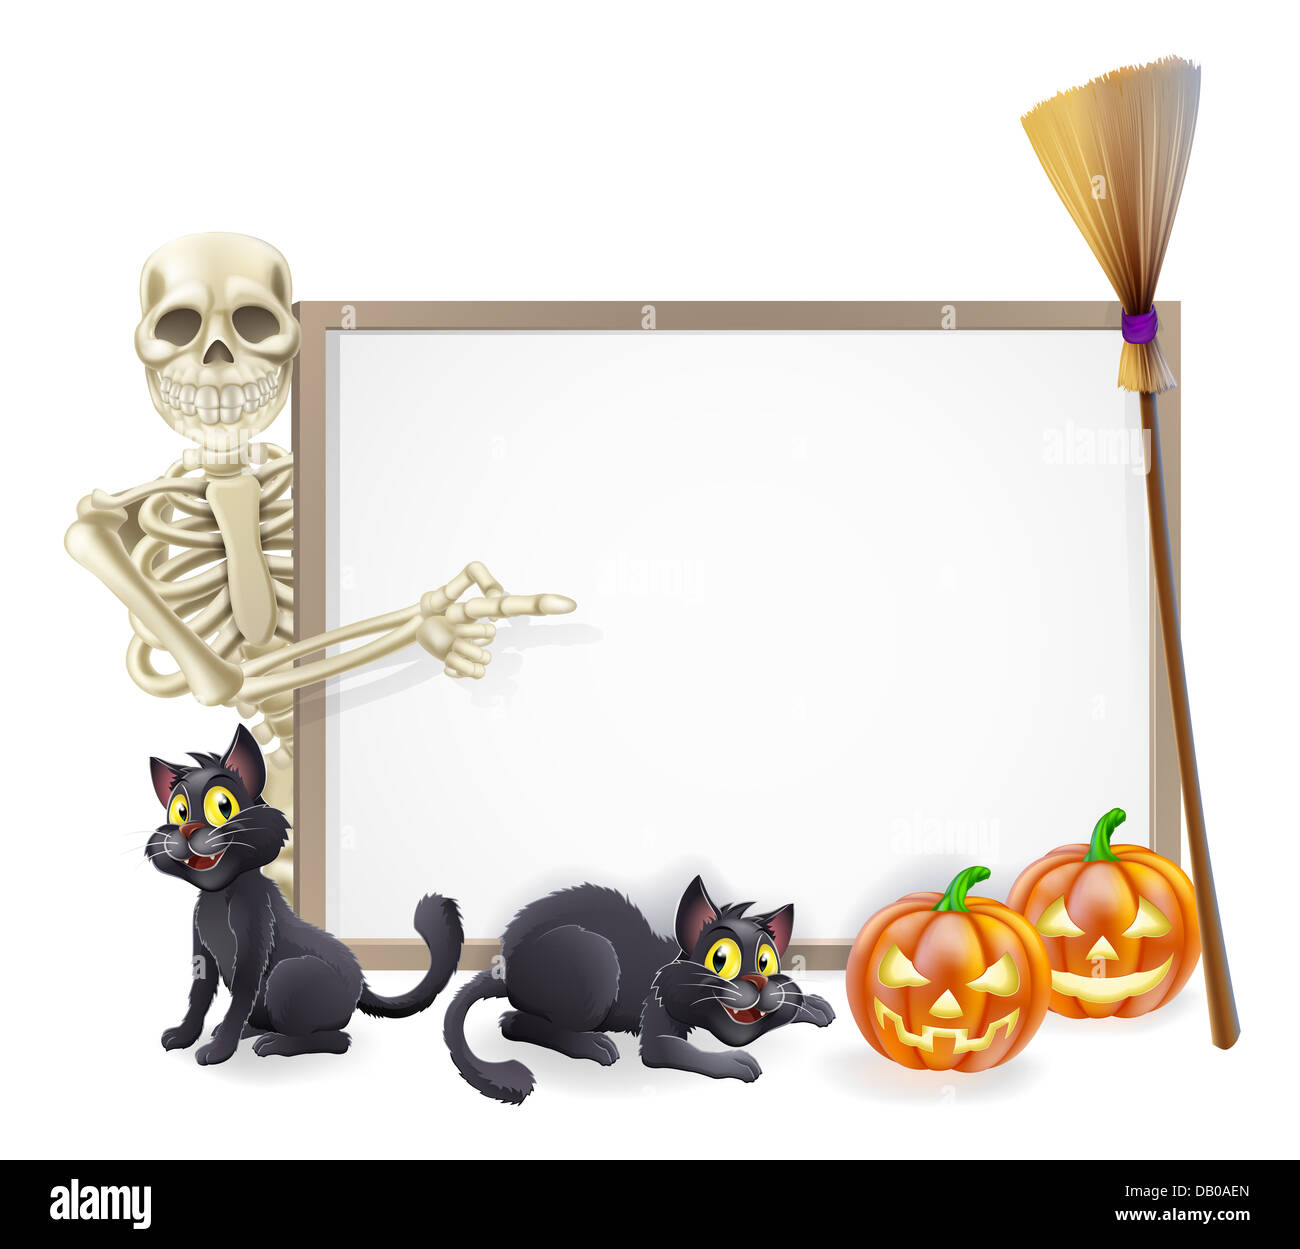 Halloween sign or banner, orange Halloween pumpkins and black witch's cats, witch's broom stick and cartoon skeleton character Stock Photo